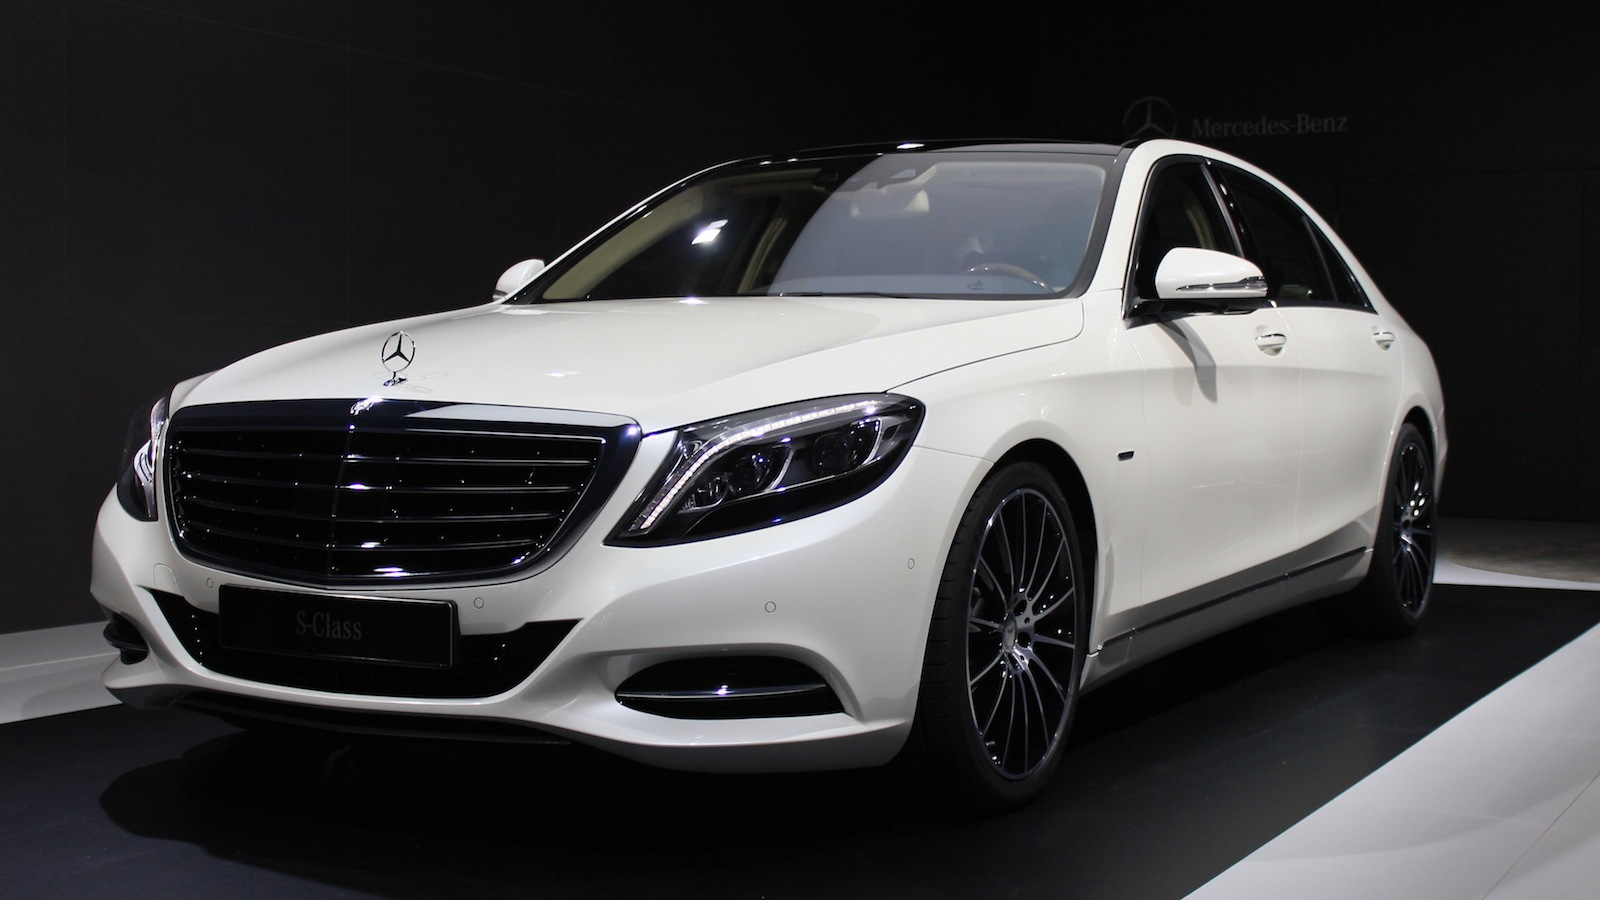 2014 Mercedes-Benz S Class, live photos from unveiling in Hamburg